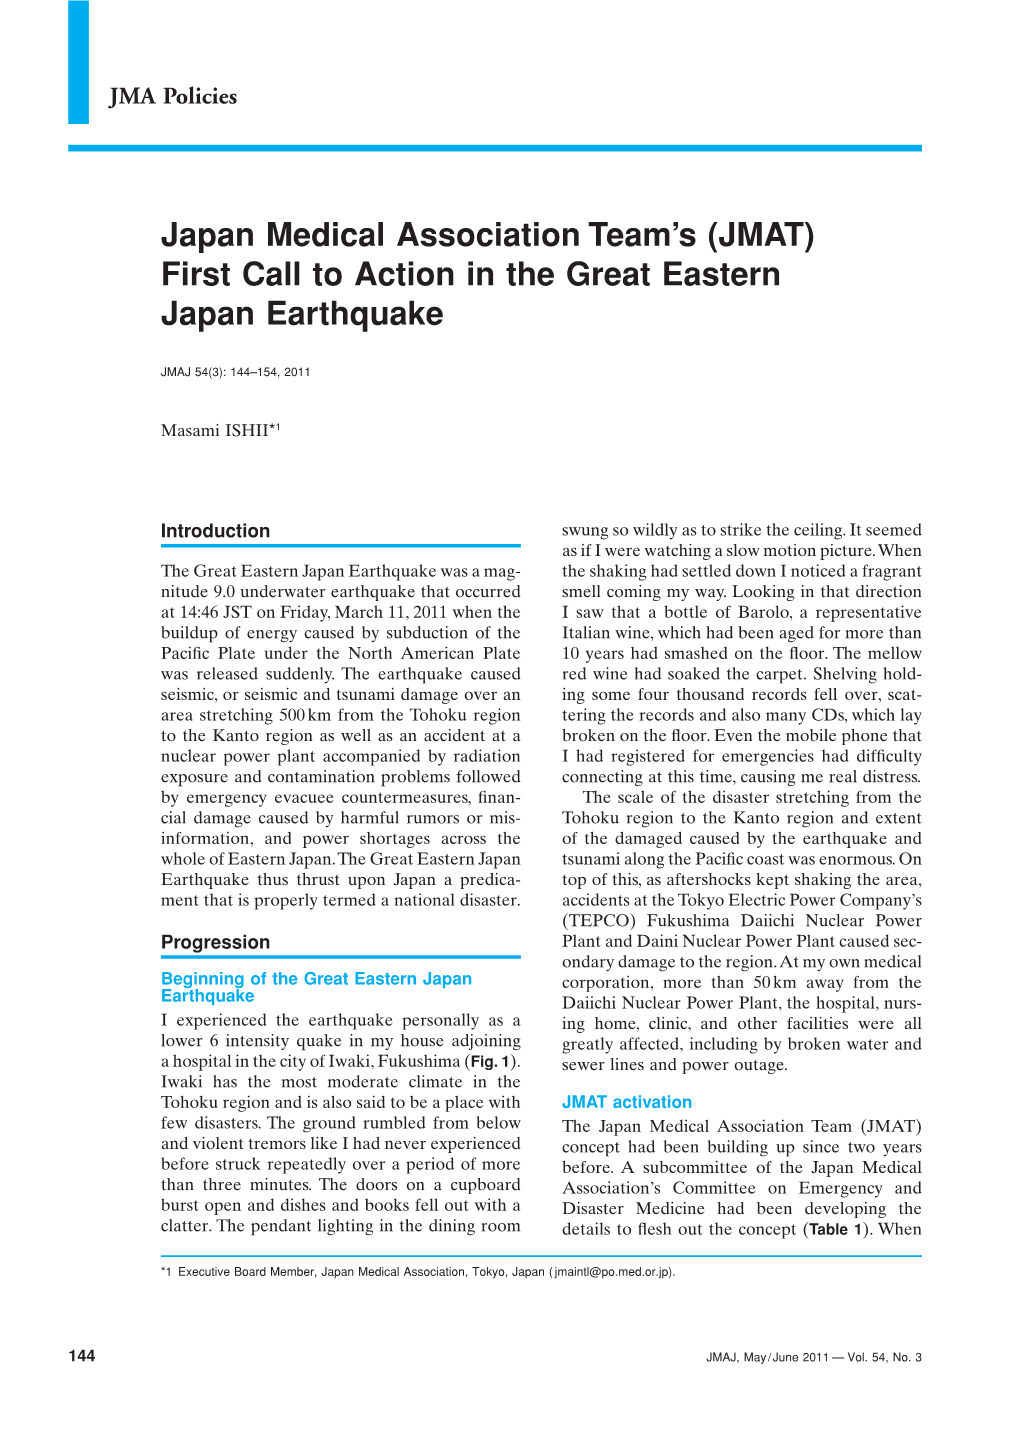 Japan Medical Association Team's (JMAT) First Call to Action in The